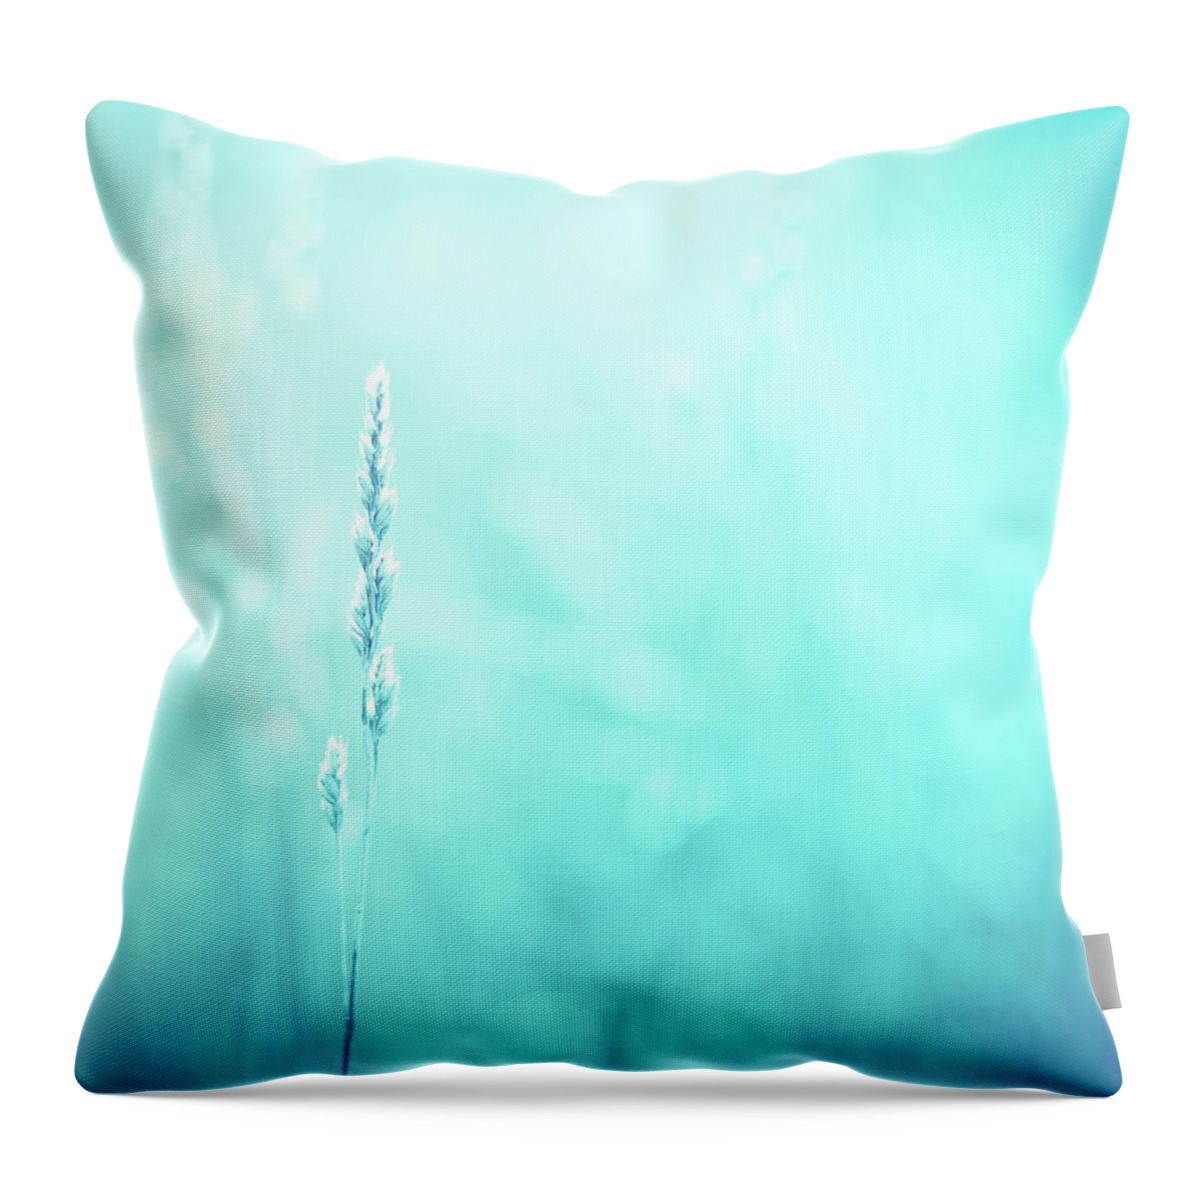 Cool Attitude Throw Pillow featuring the photograph Nature In Blue #1 by Jasmina007